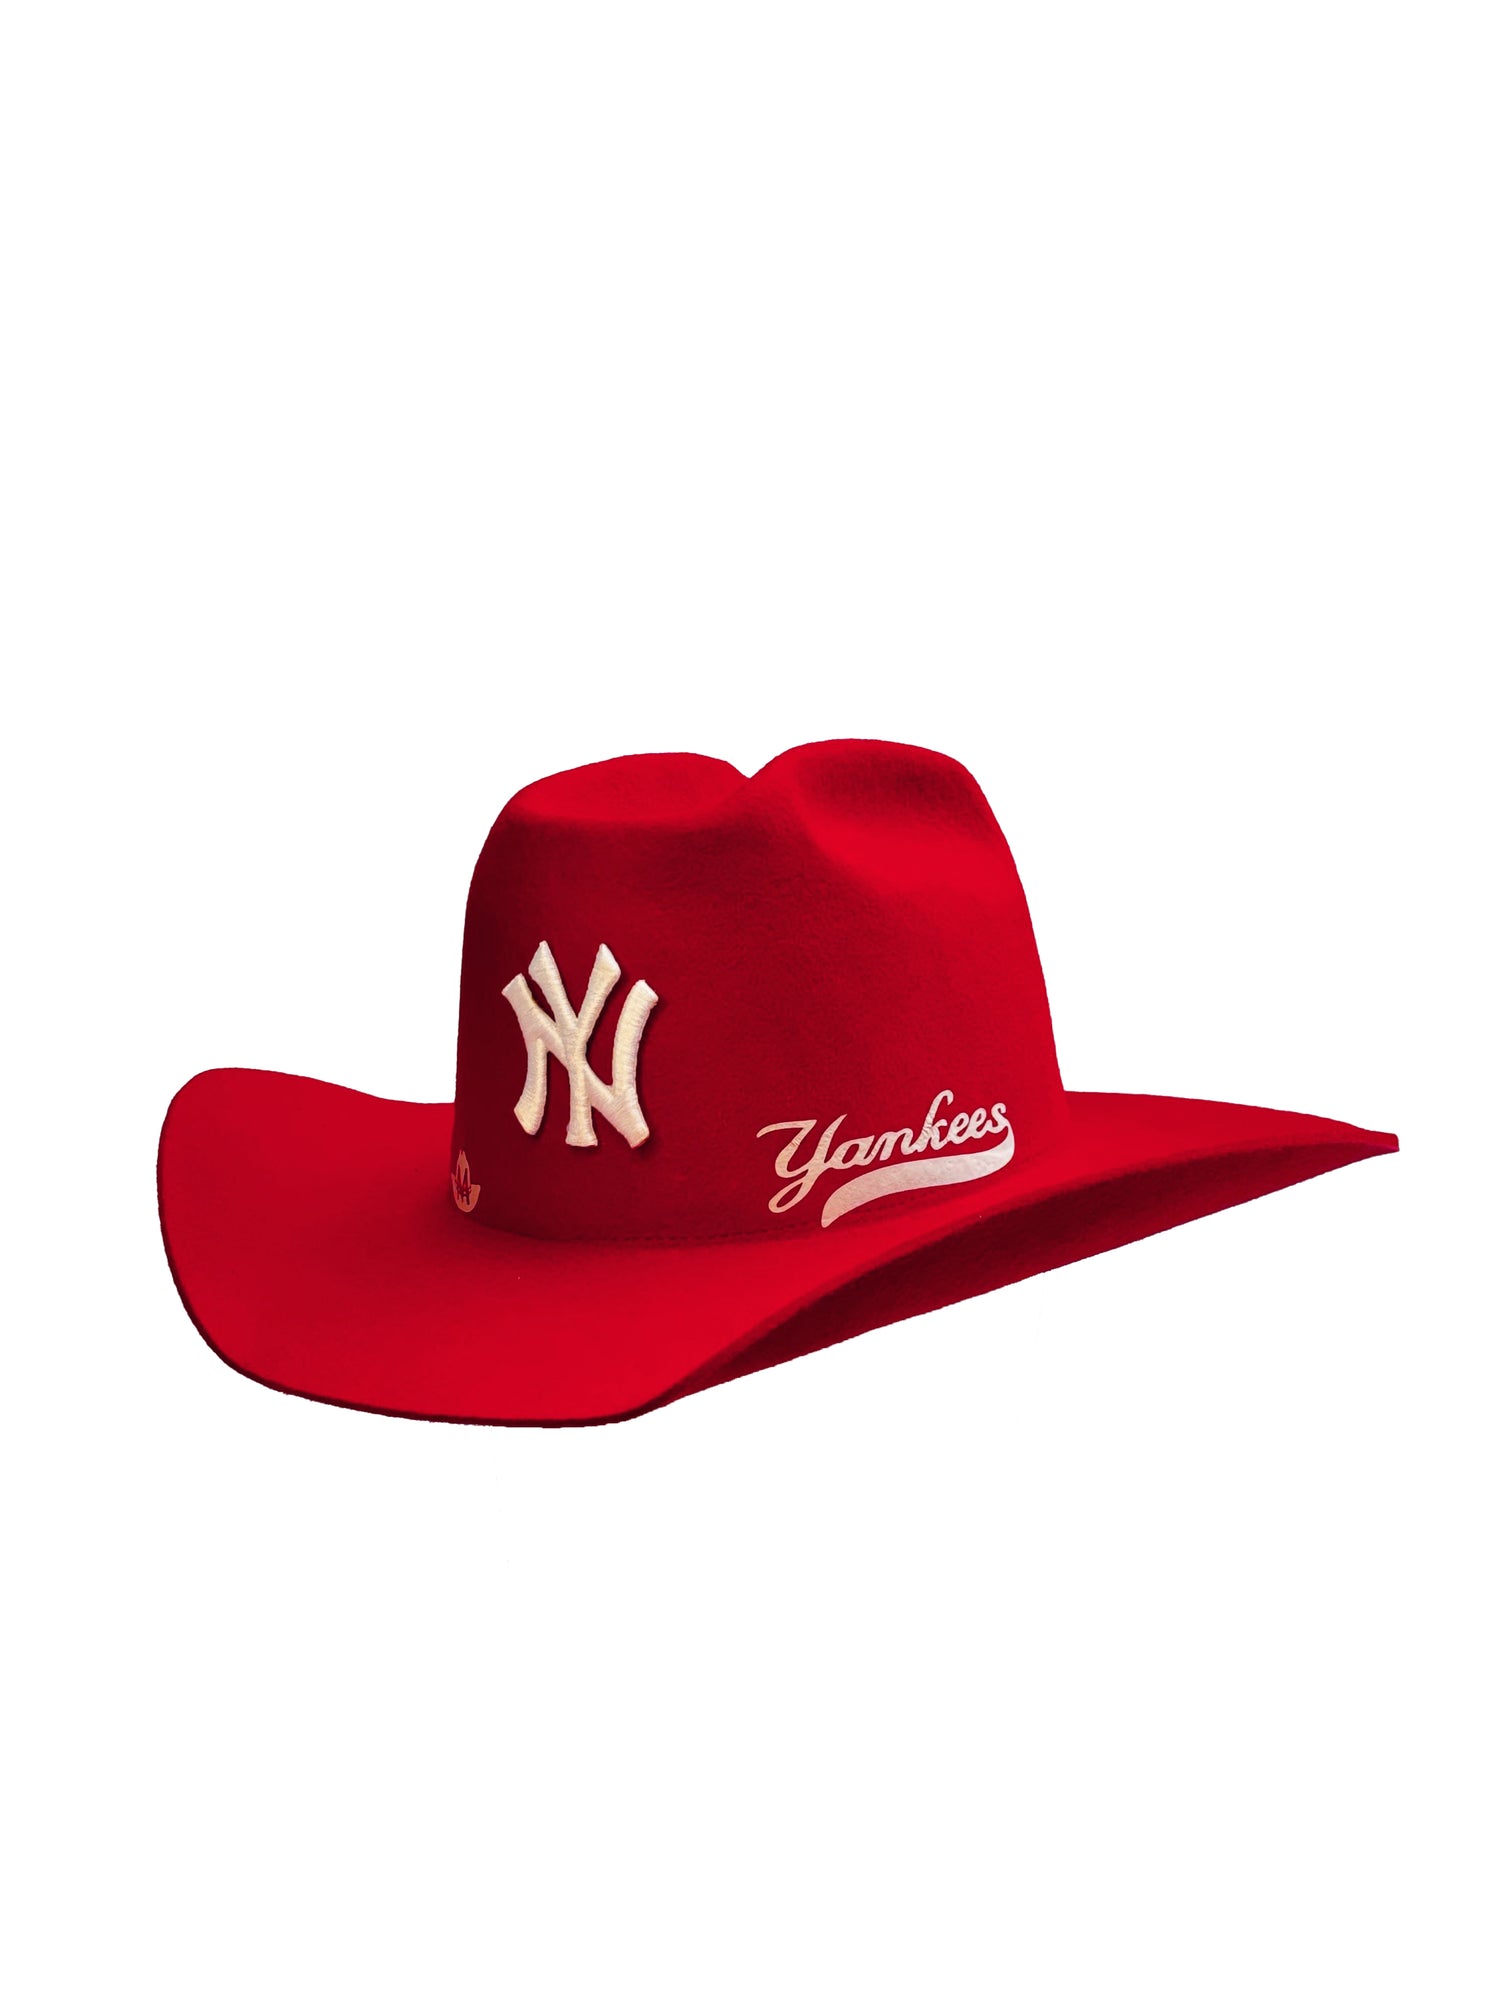 NEW YORK YANKEES COWBOY HAT WITH RED COLORE AND WHITE LOGO 